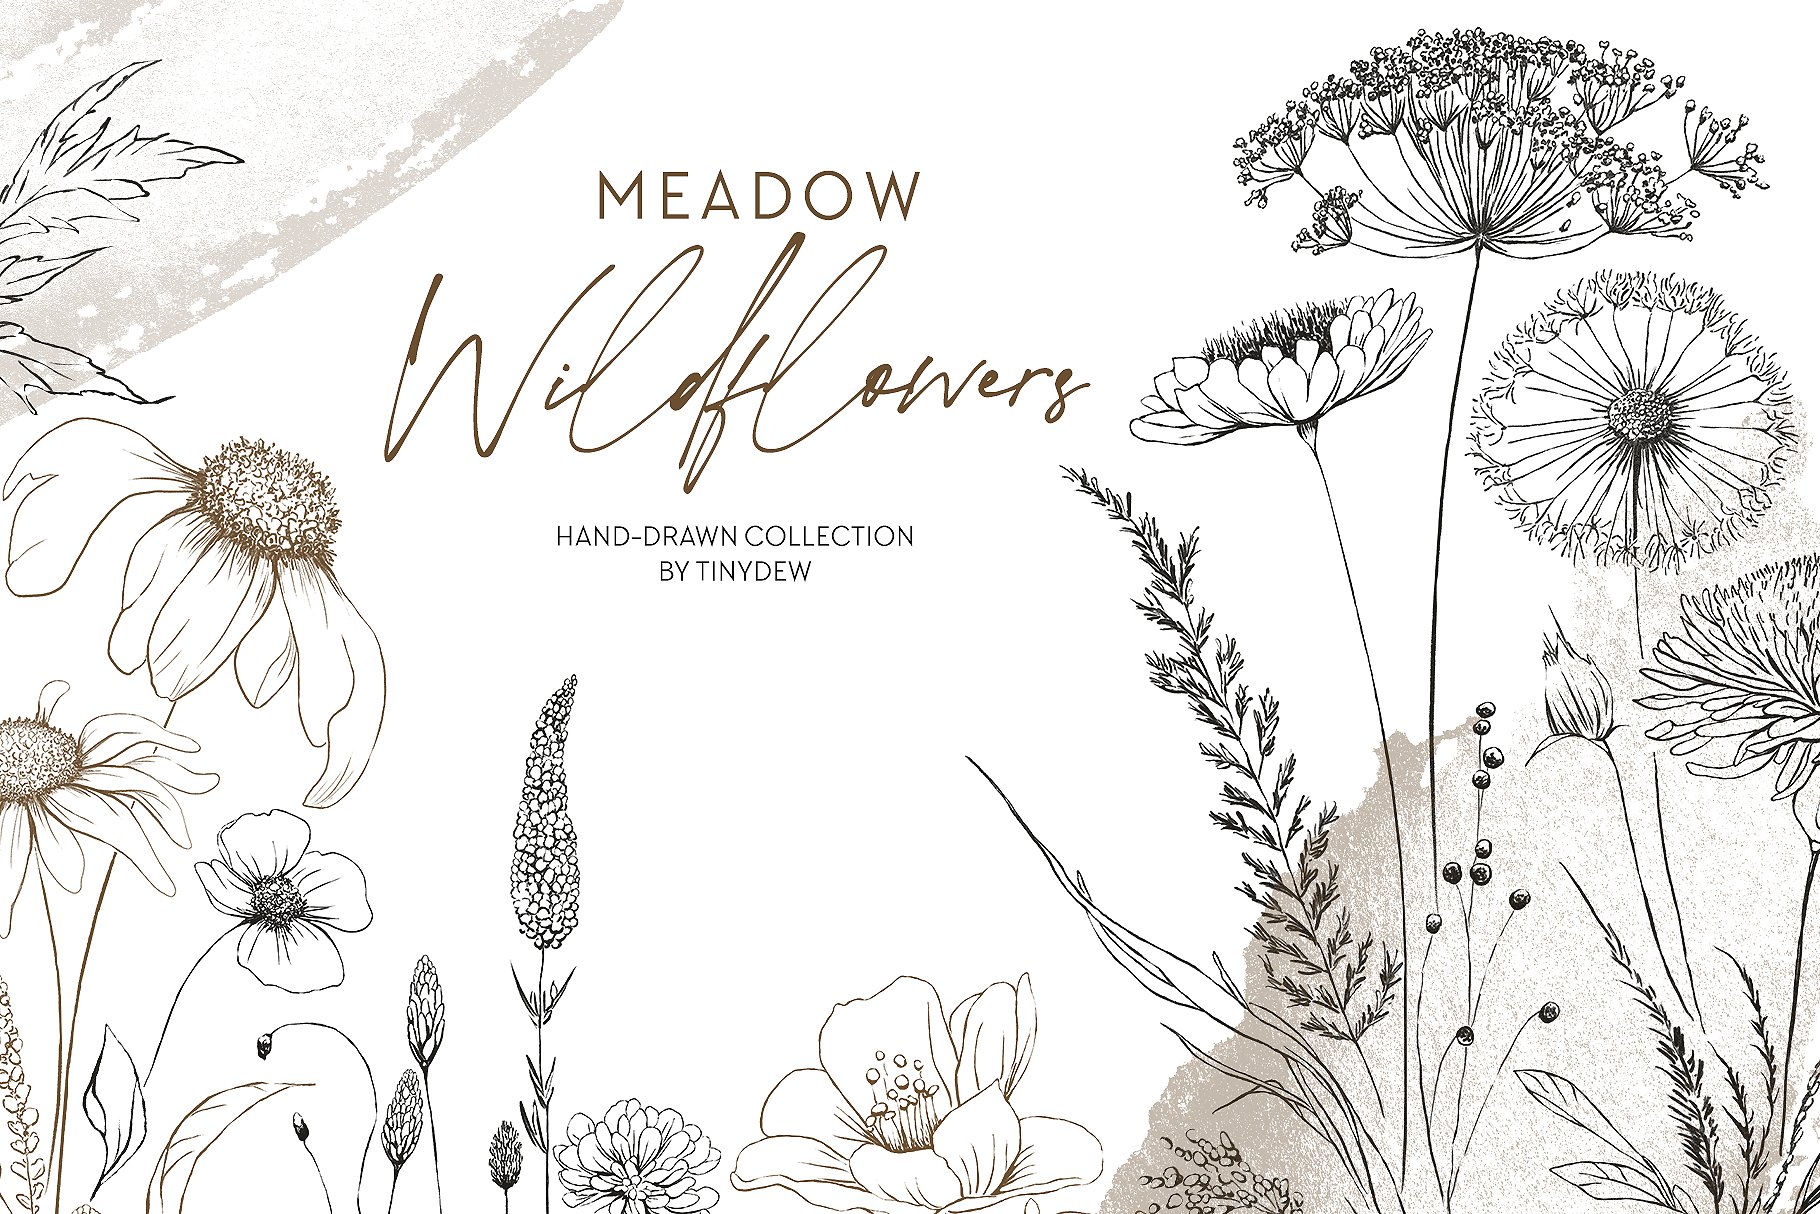 Meadow Wildflowers Hand-Drawn Sketch cover image.